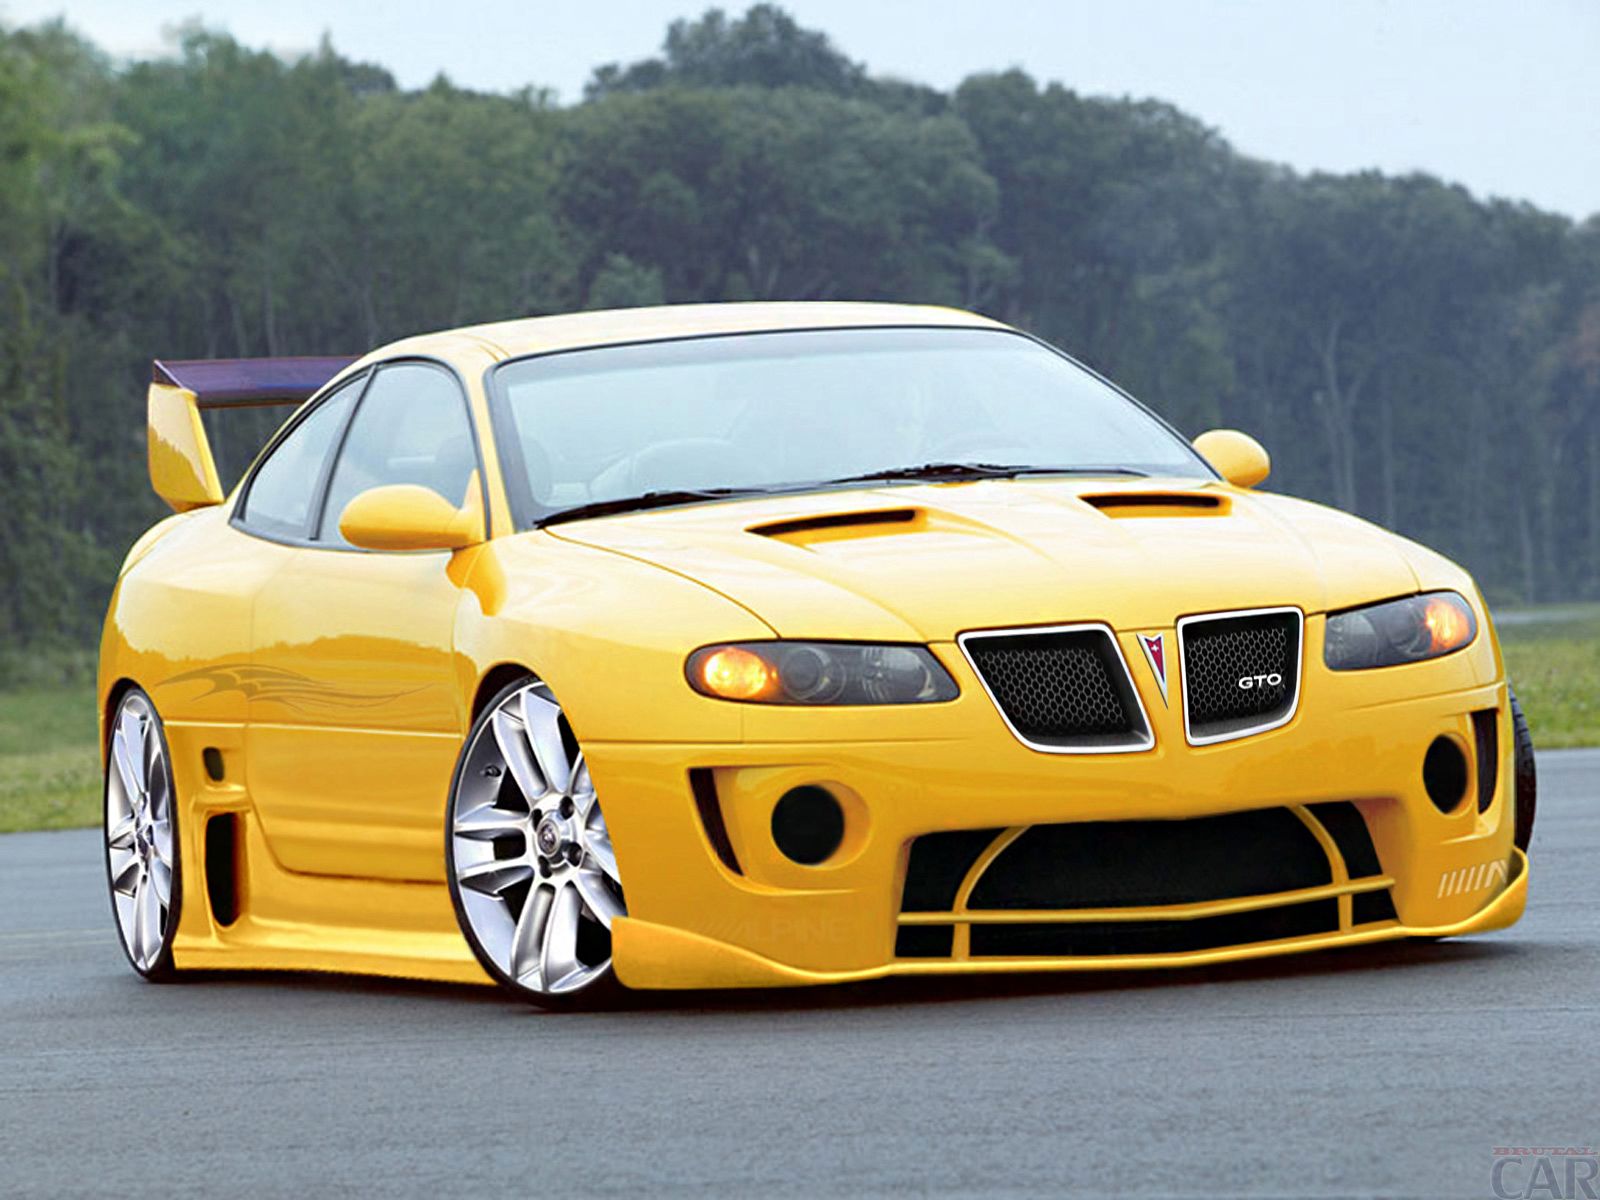 Download Wallpapers With Remarkable Yellow Racing Car - 2006 Pontiac Gto Tricked Out - HD Wallpaper 